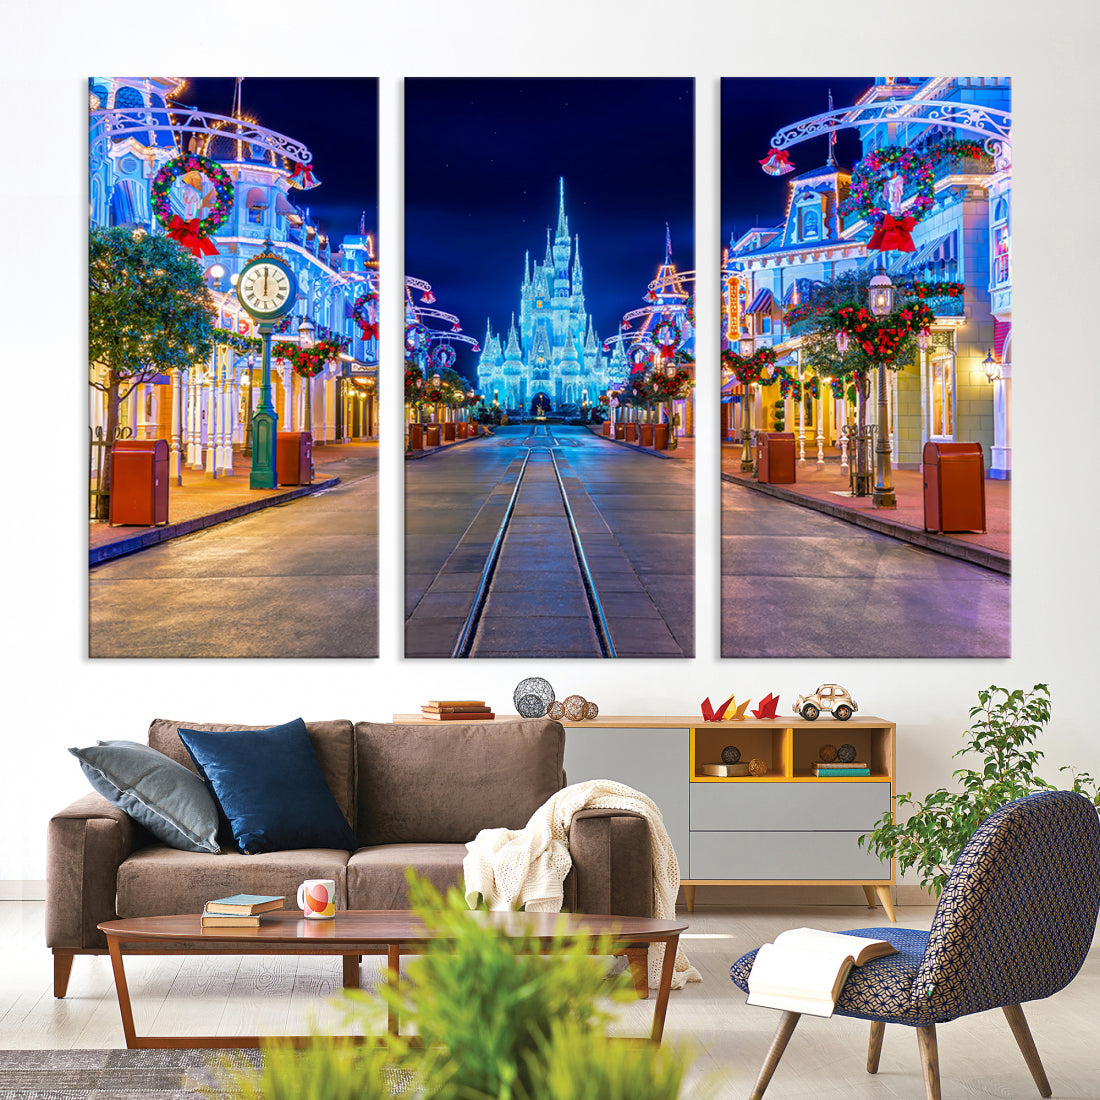 Castle Large Wall Art Disney Magic Kingdom Kids Room Decoration Disney World Christmas Home Decor Child gift - Stretched and Ready to Hang